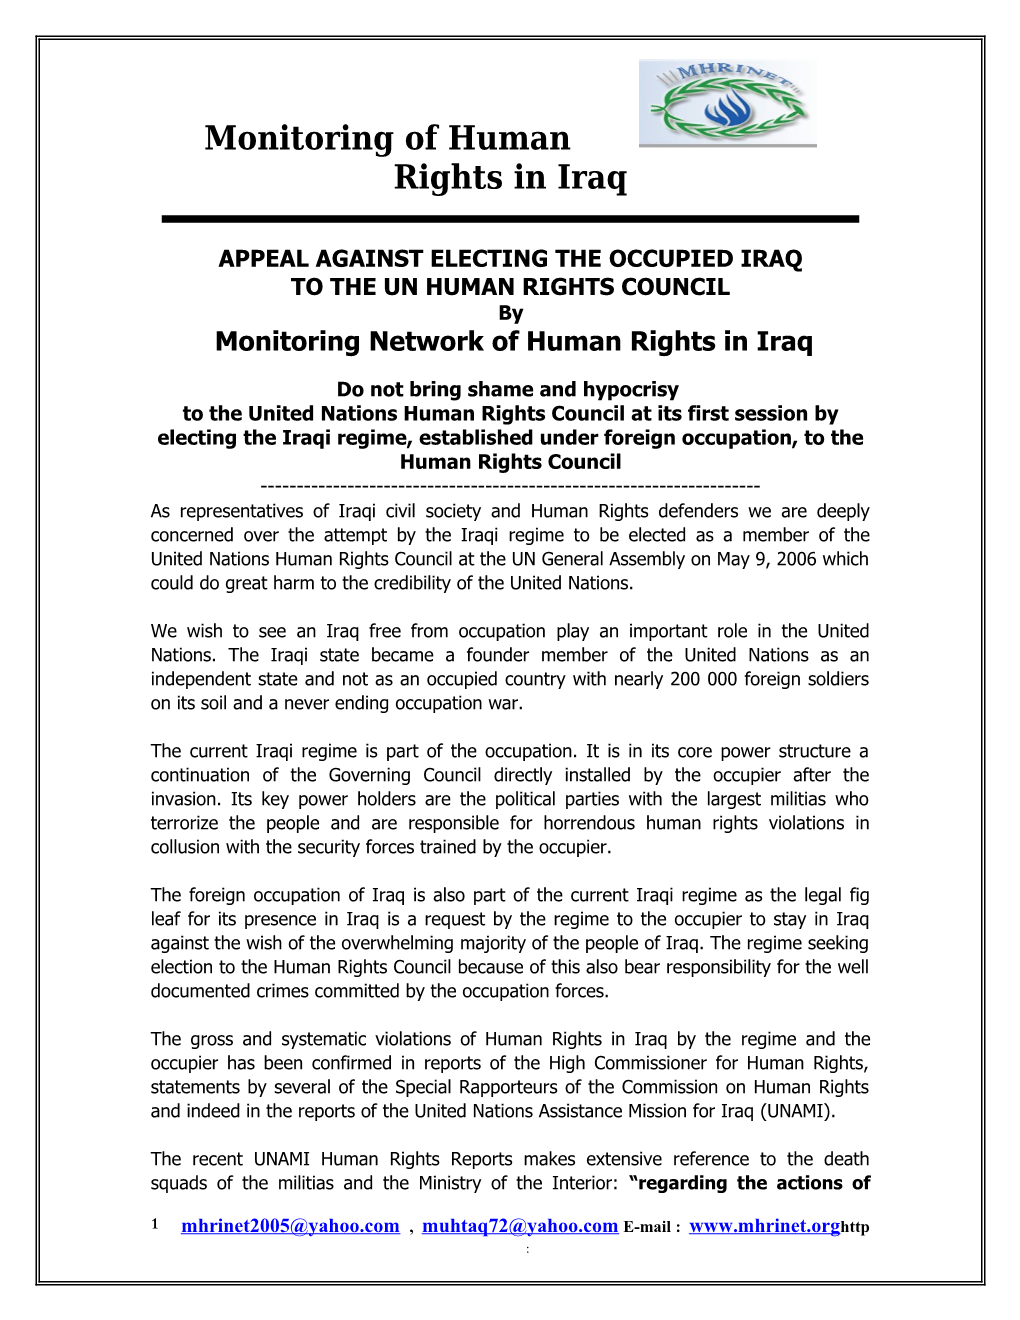 Appeal Against Electing Theoccupied Iraq